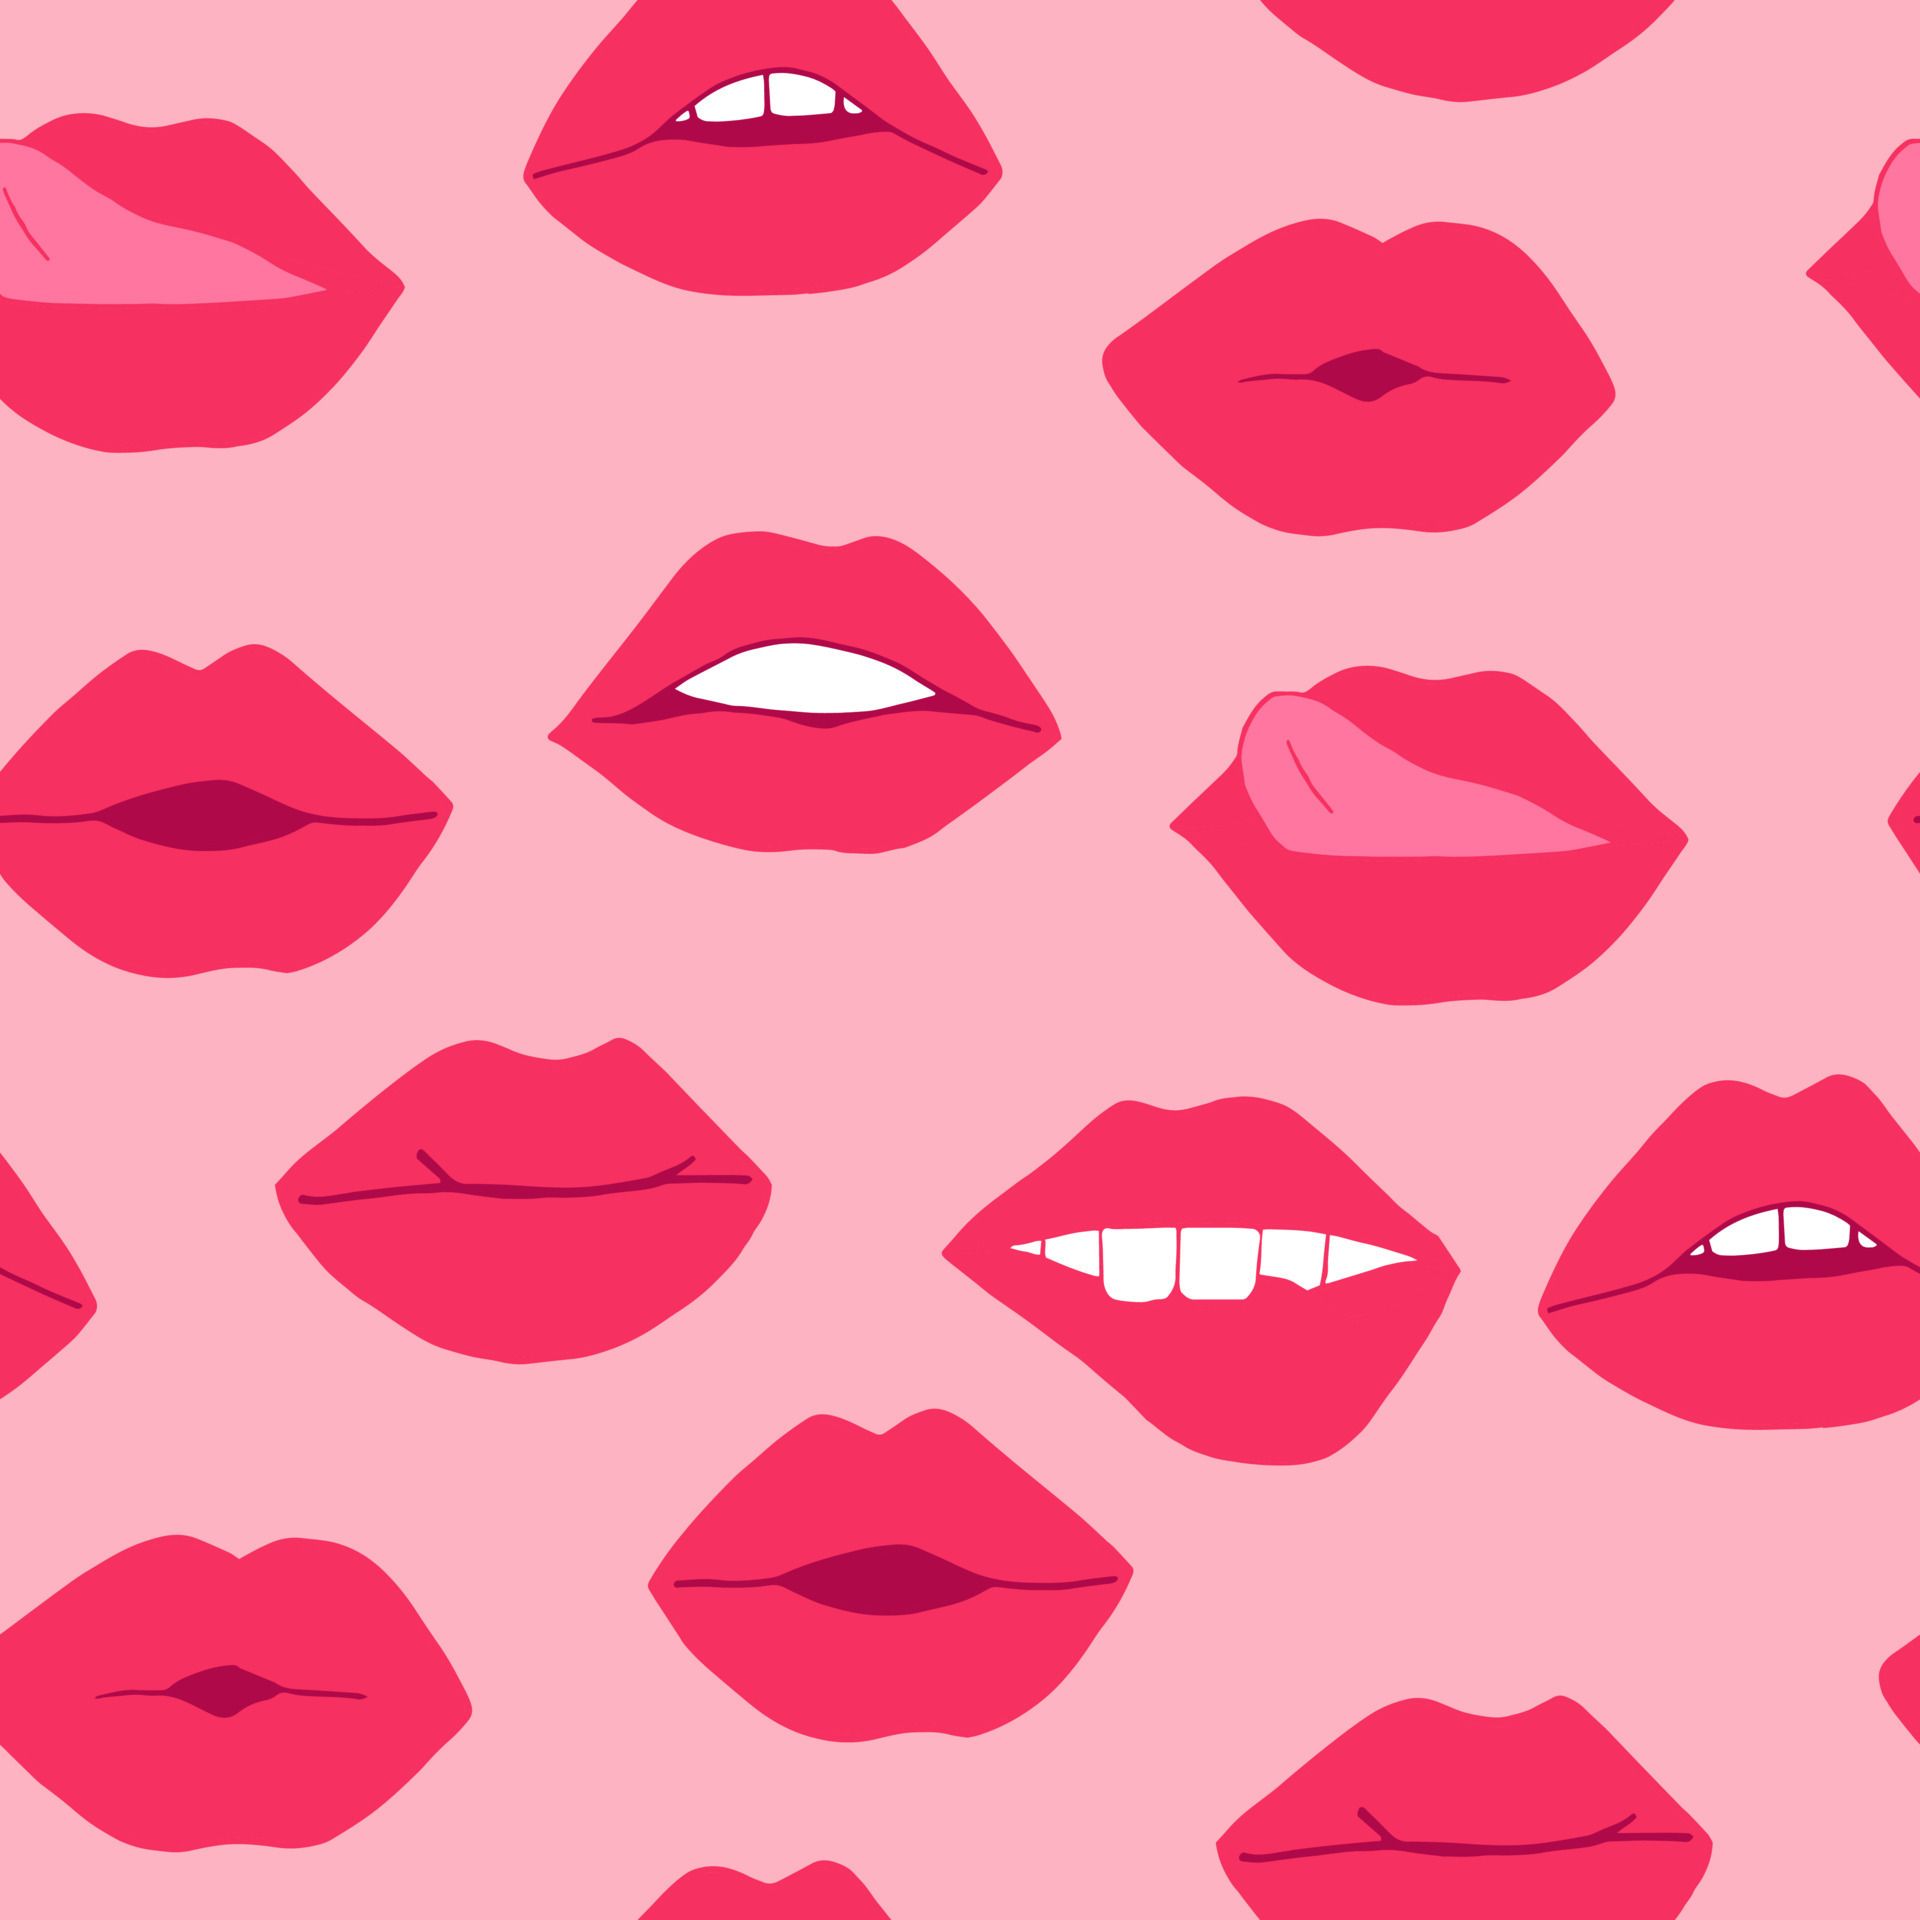 lips with pink lipstick seamless pattern. mouth illustration hand drawn in cartoon style